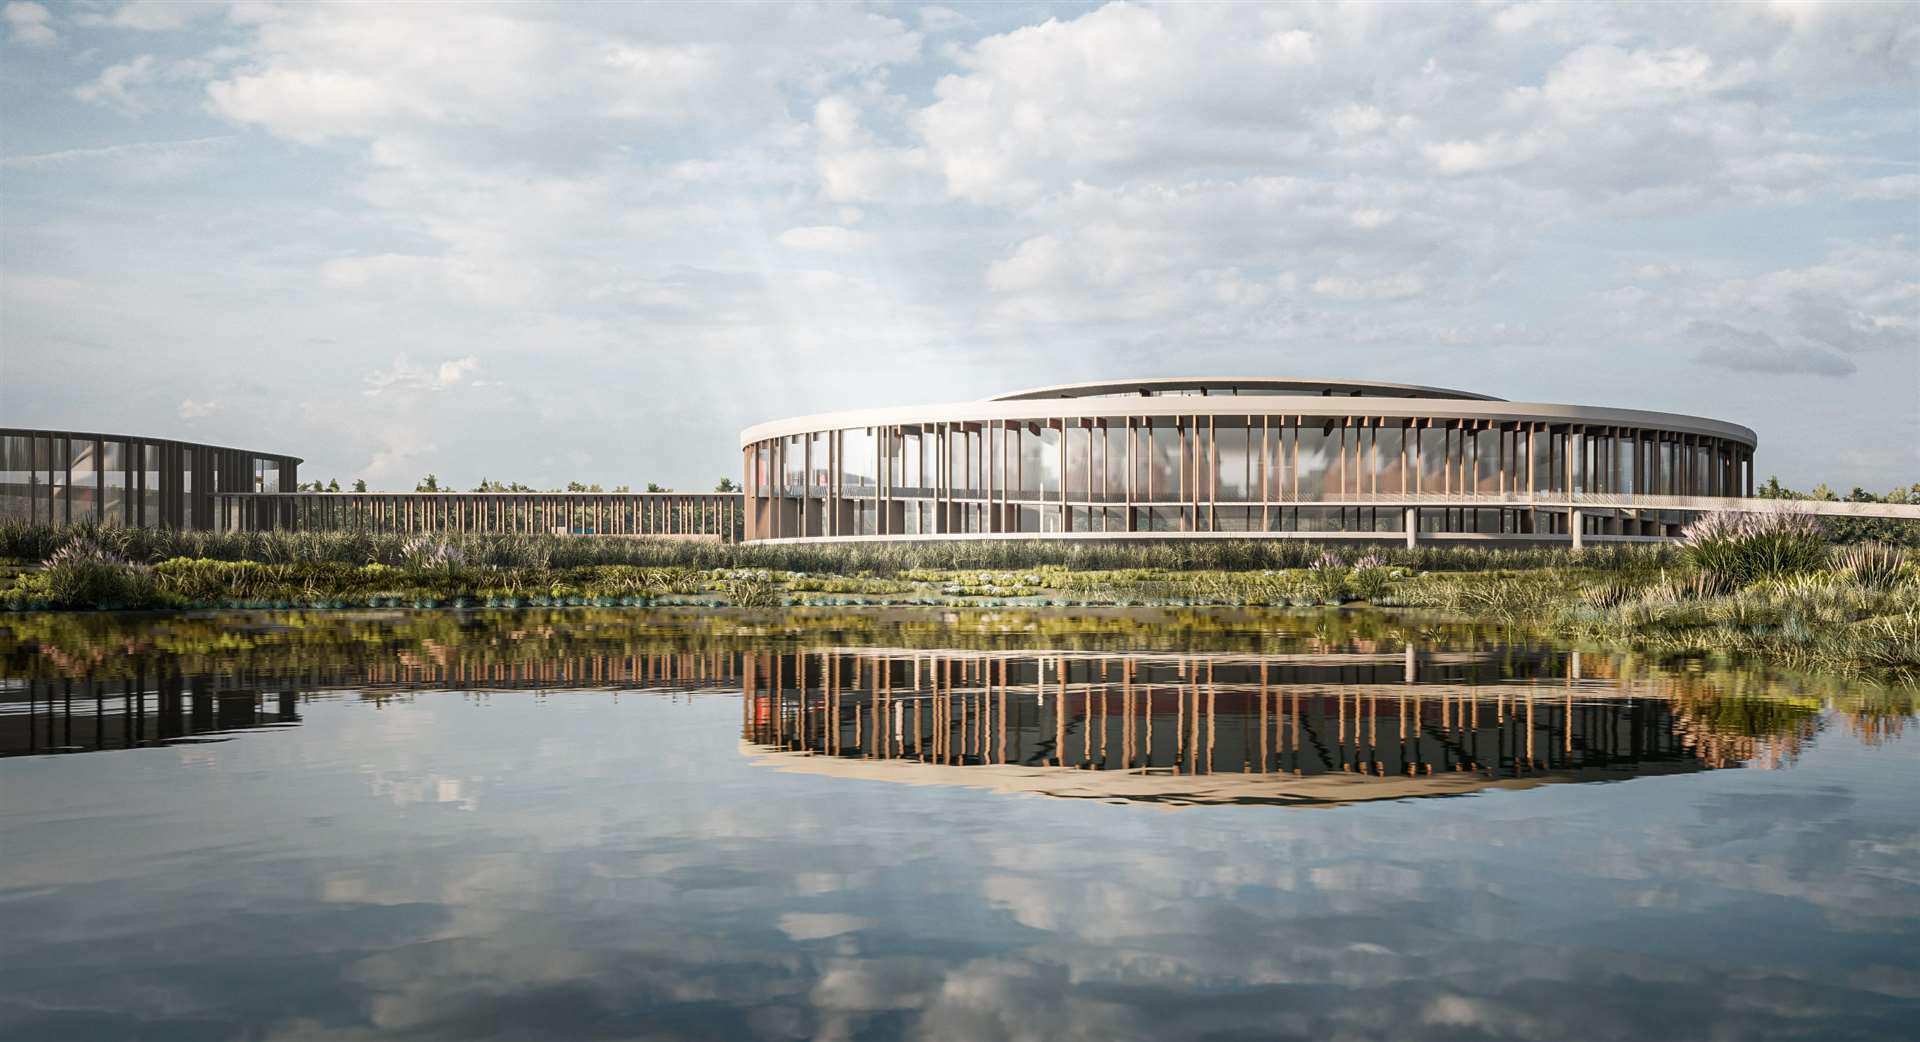 The factory will be built on stilts on wetlands. Picture: Hollaway Studios